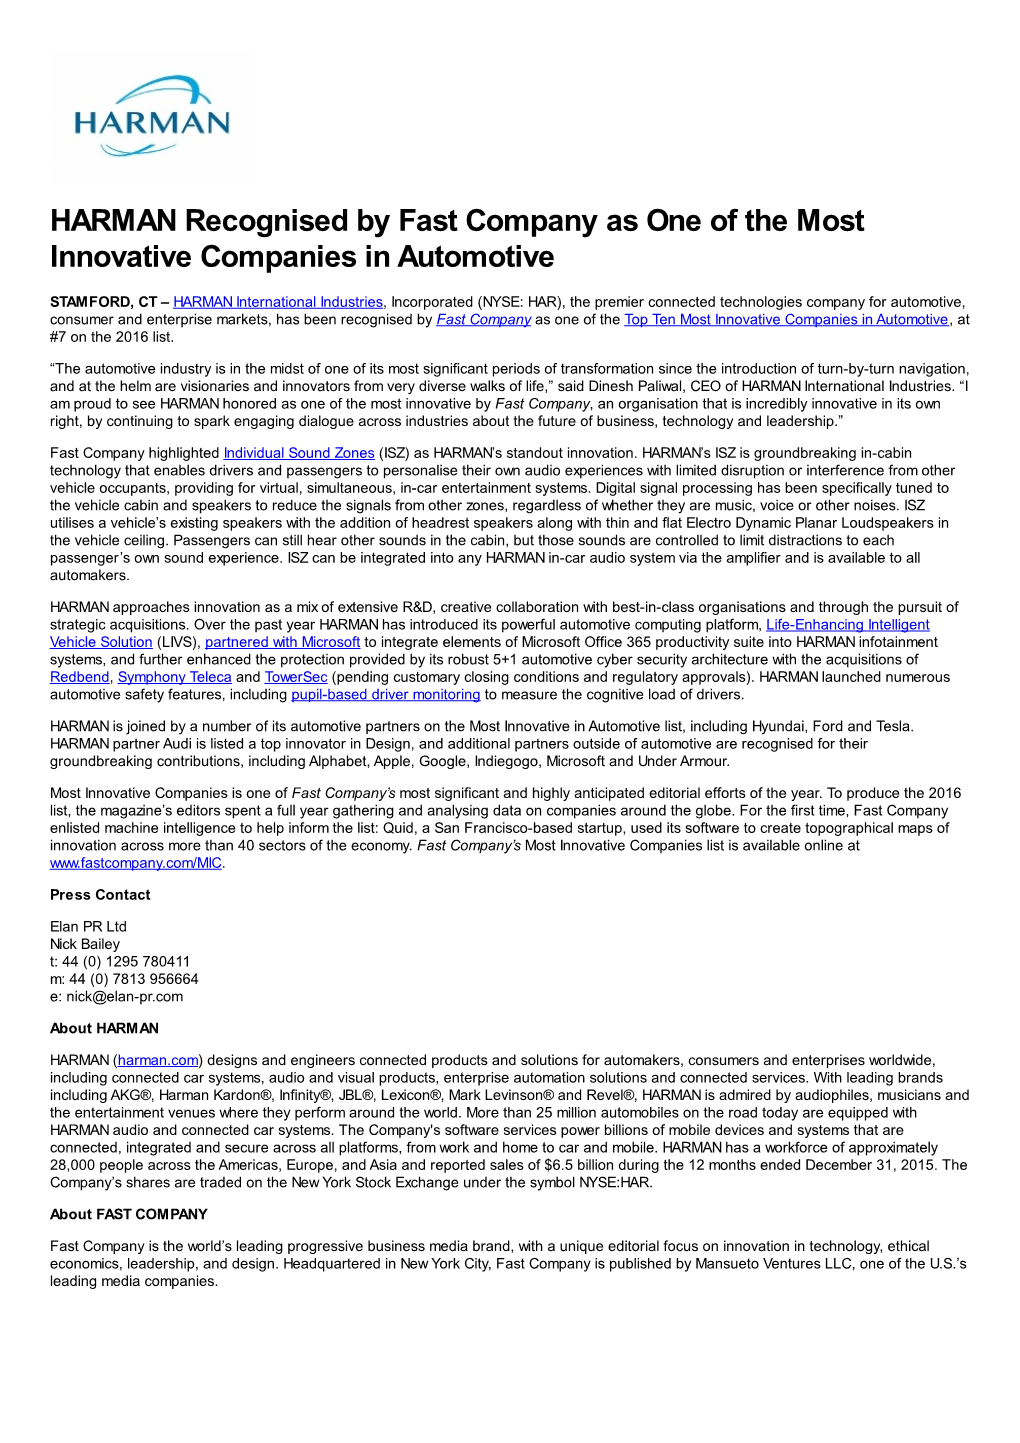 HARMAN Recognised by Fast Company As One of the Most Innovative Companies in Automotive